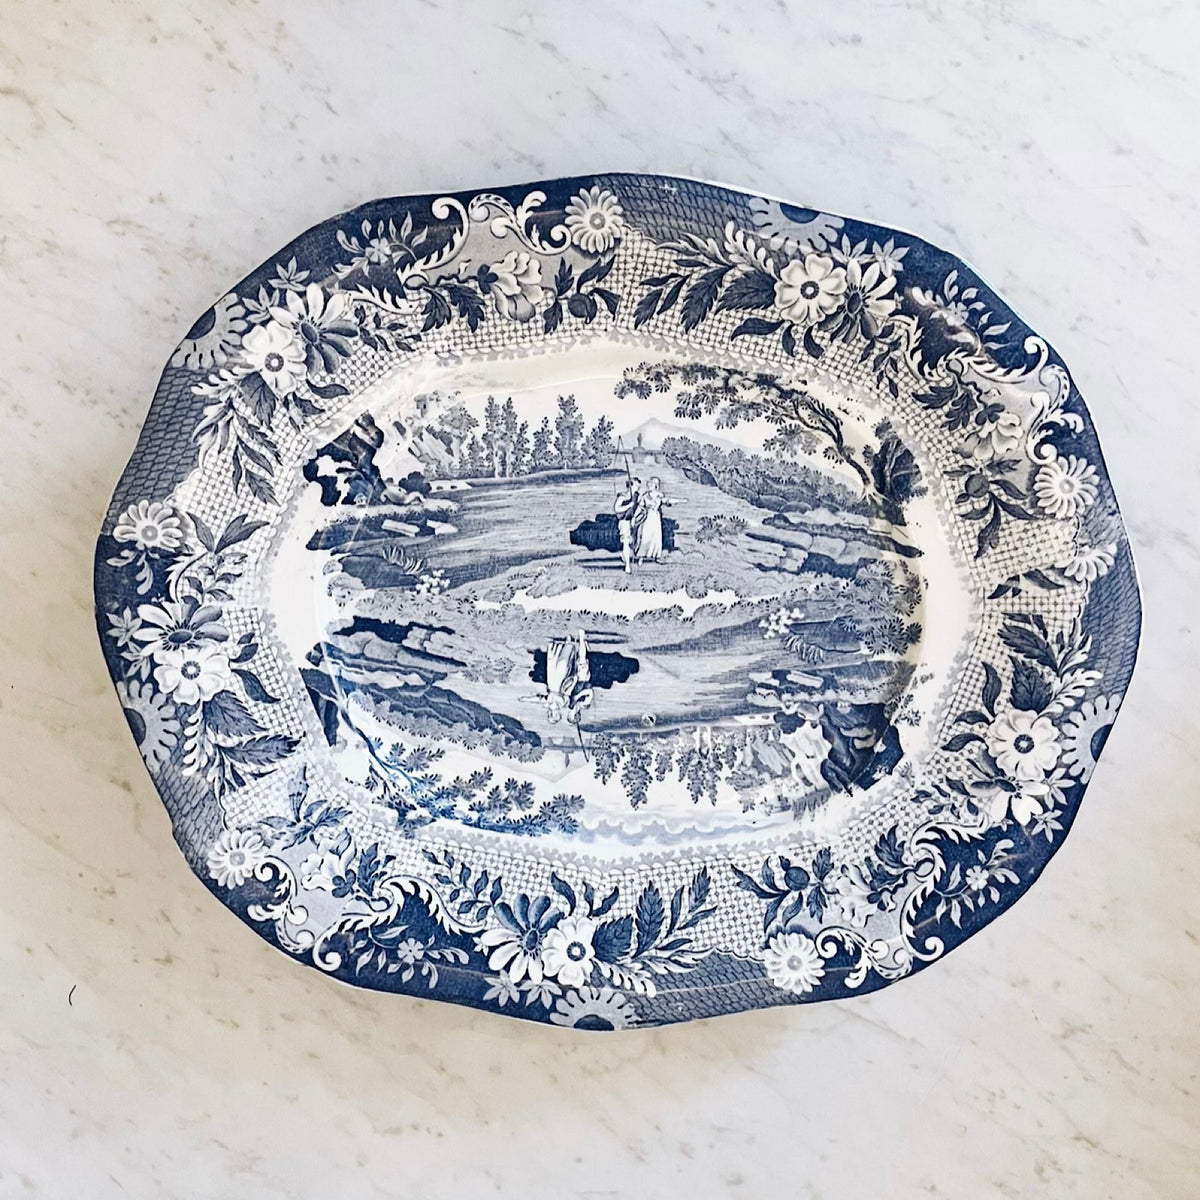 Antique Blue and White Platter